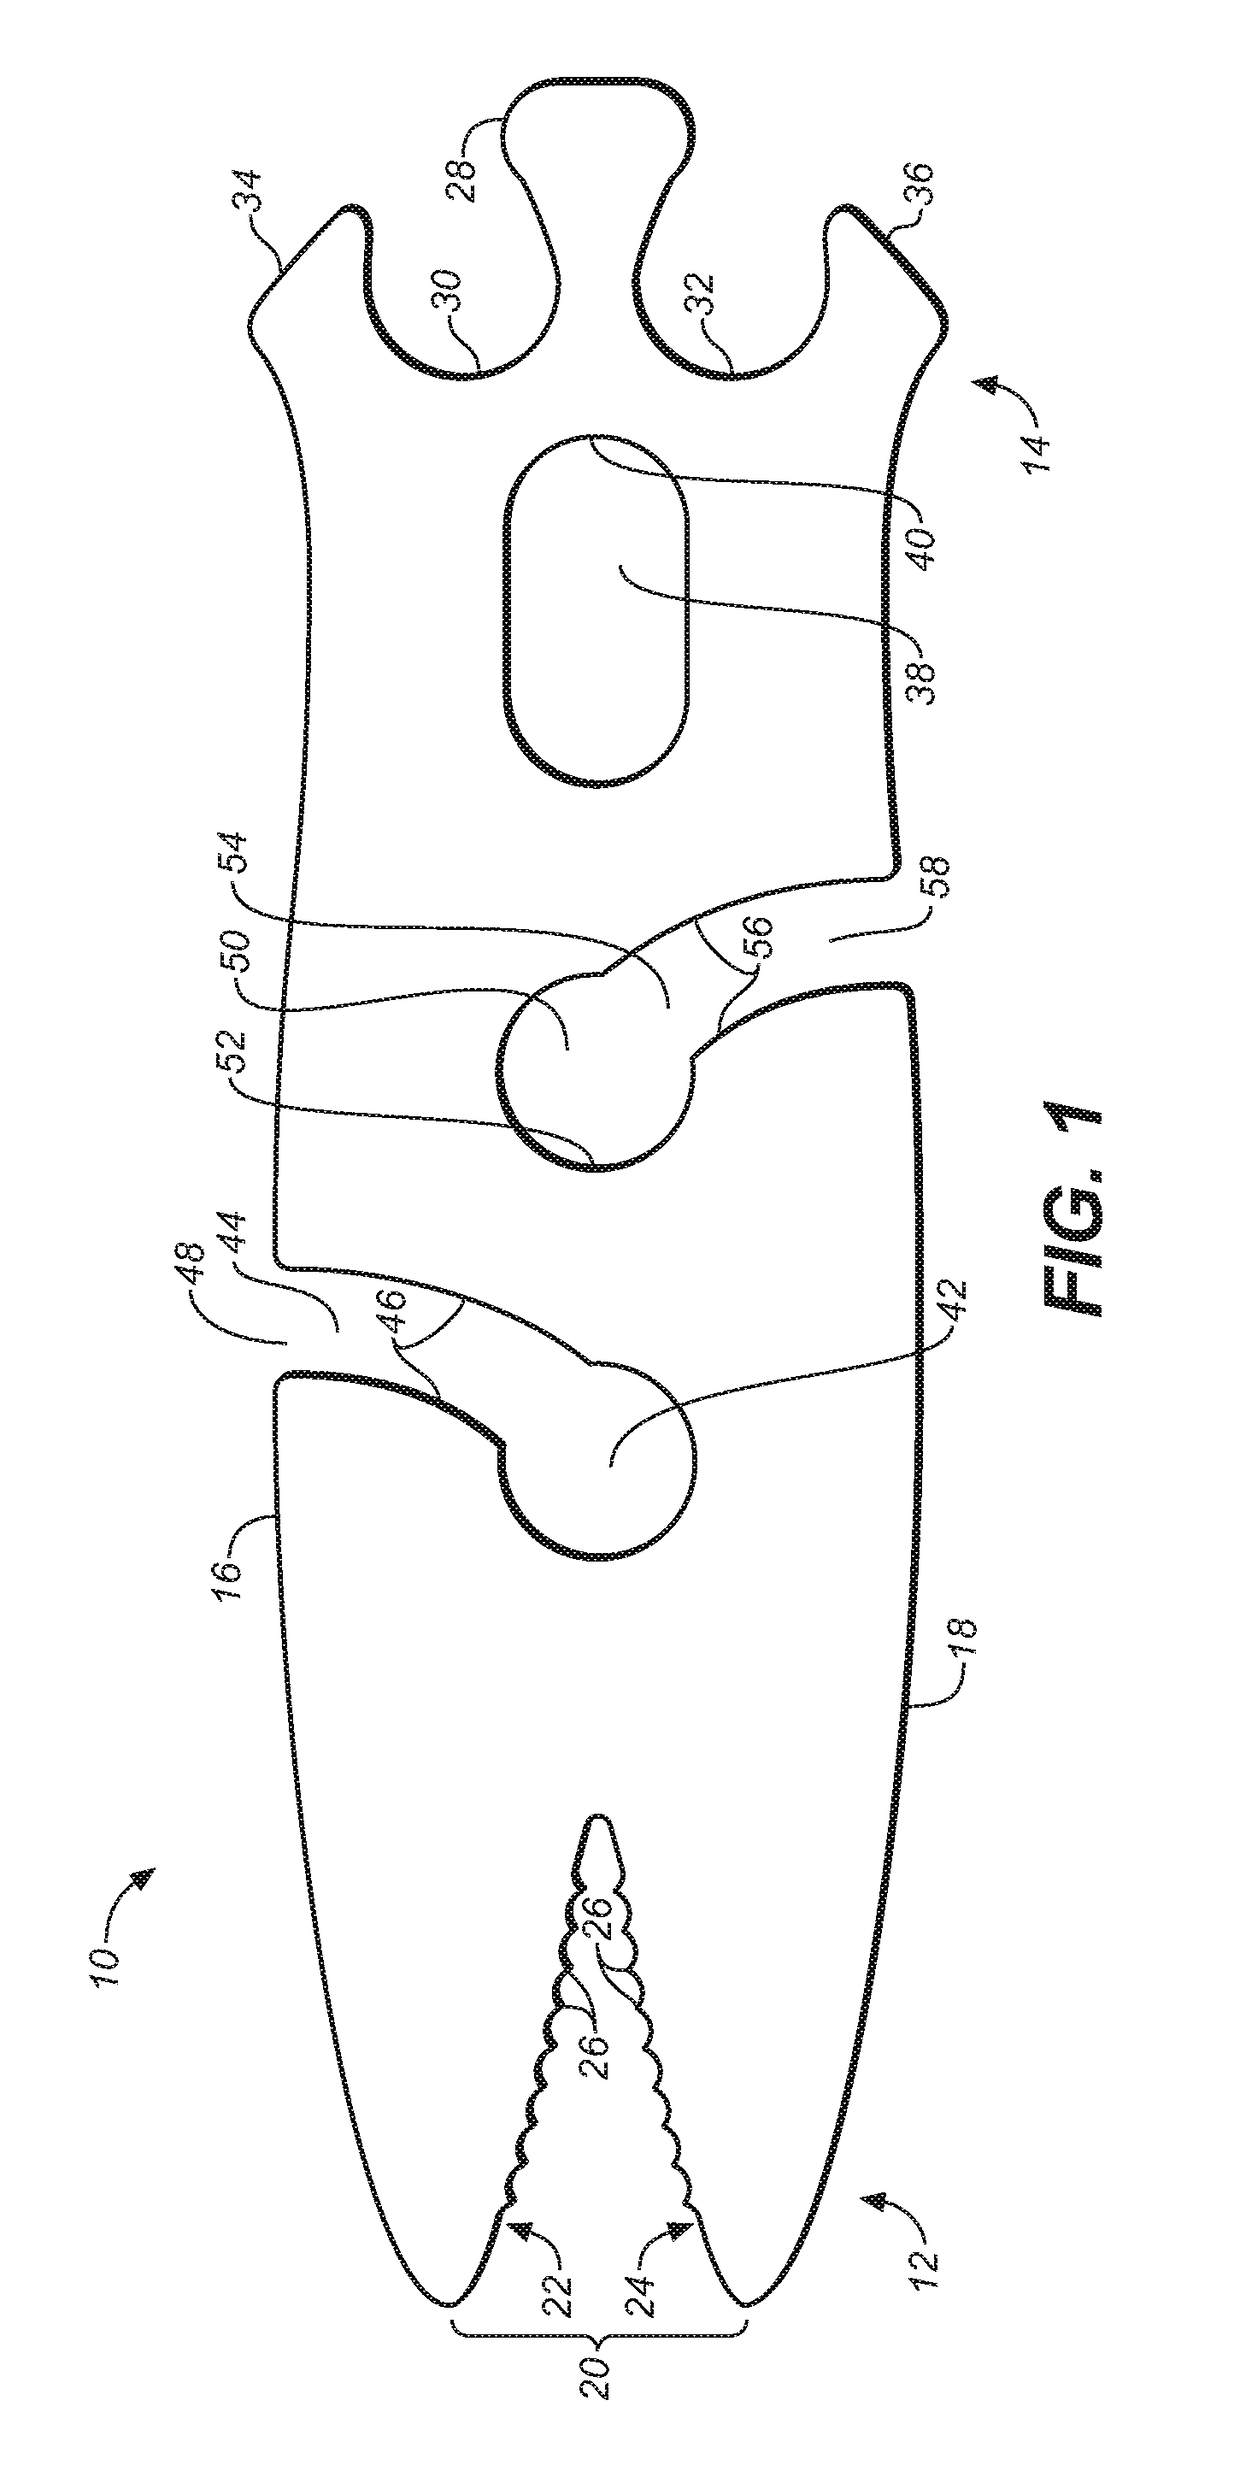 Rope tensioning and fastening device